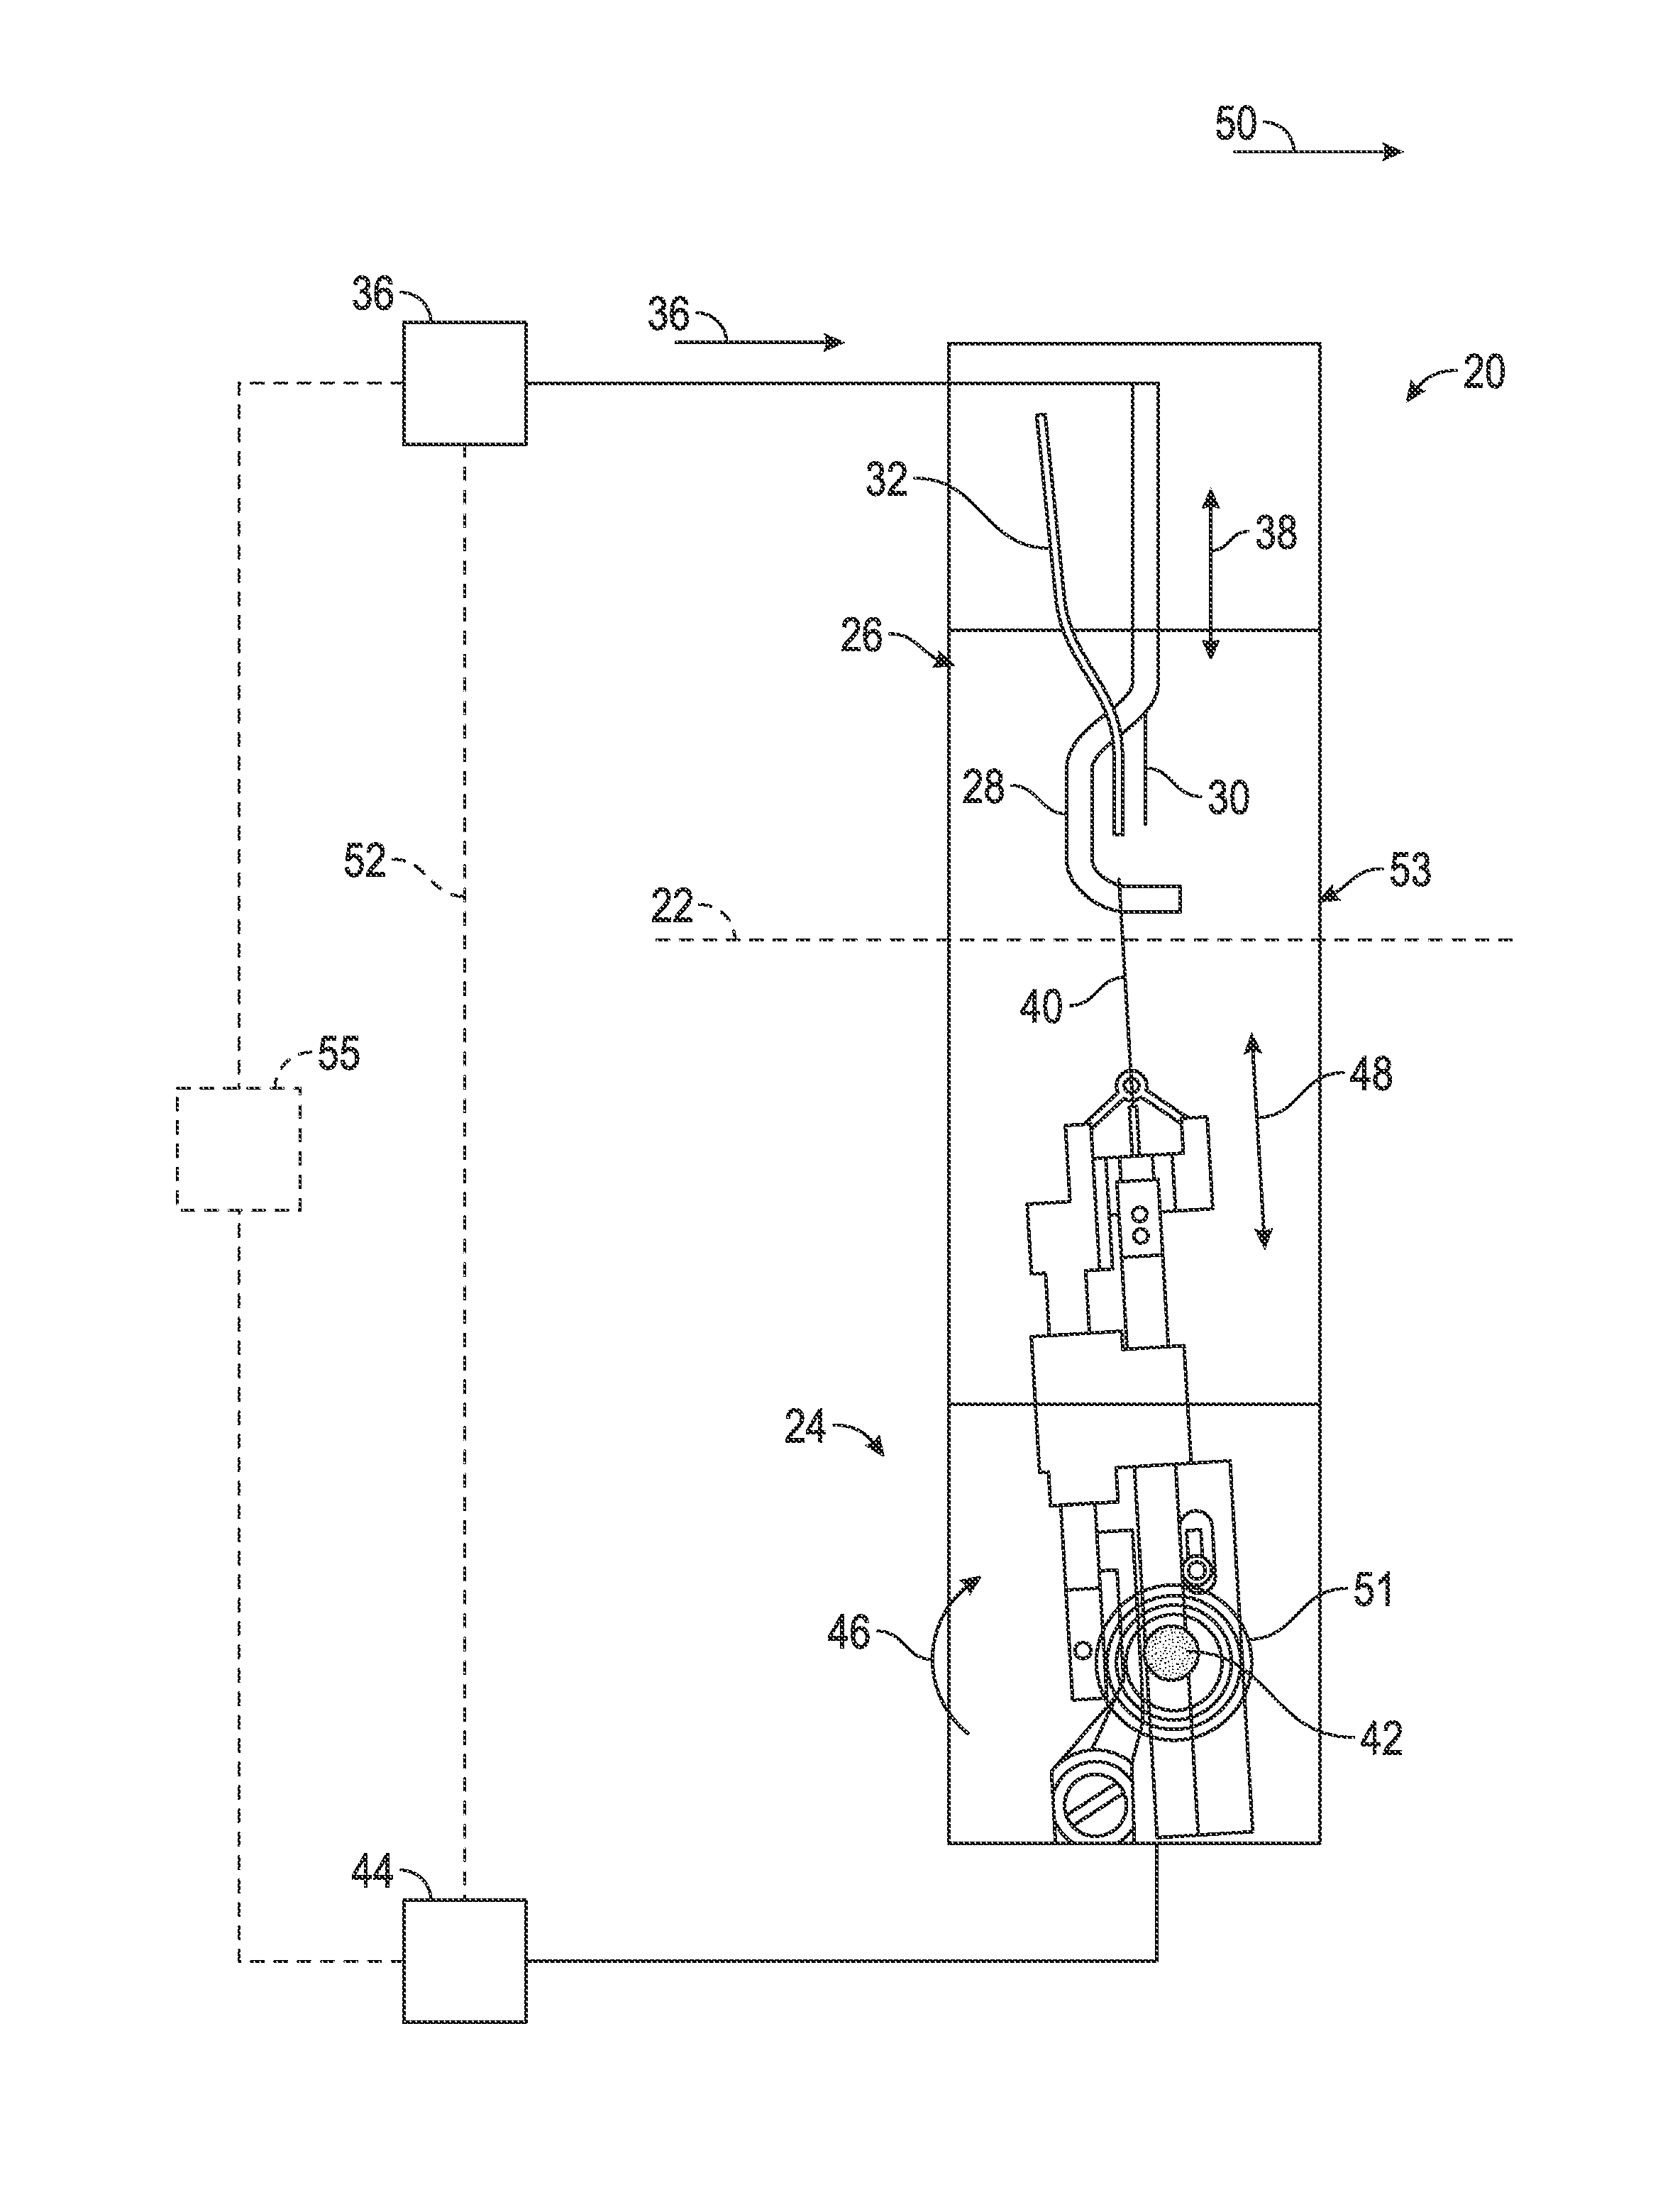 Apparatus for stitching vehicle interior components